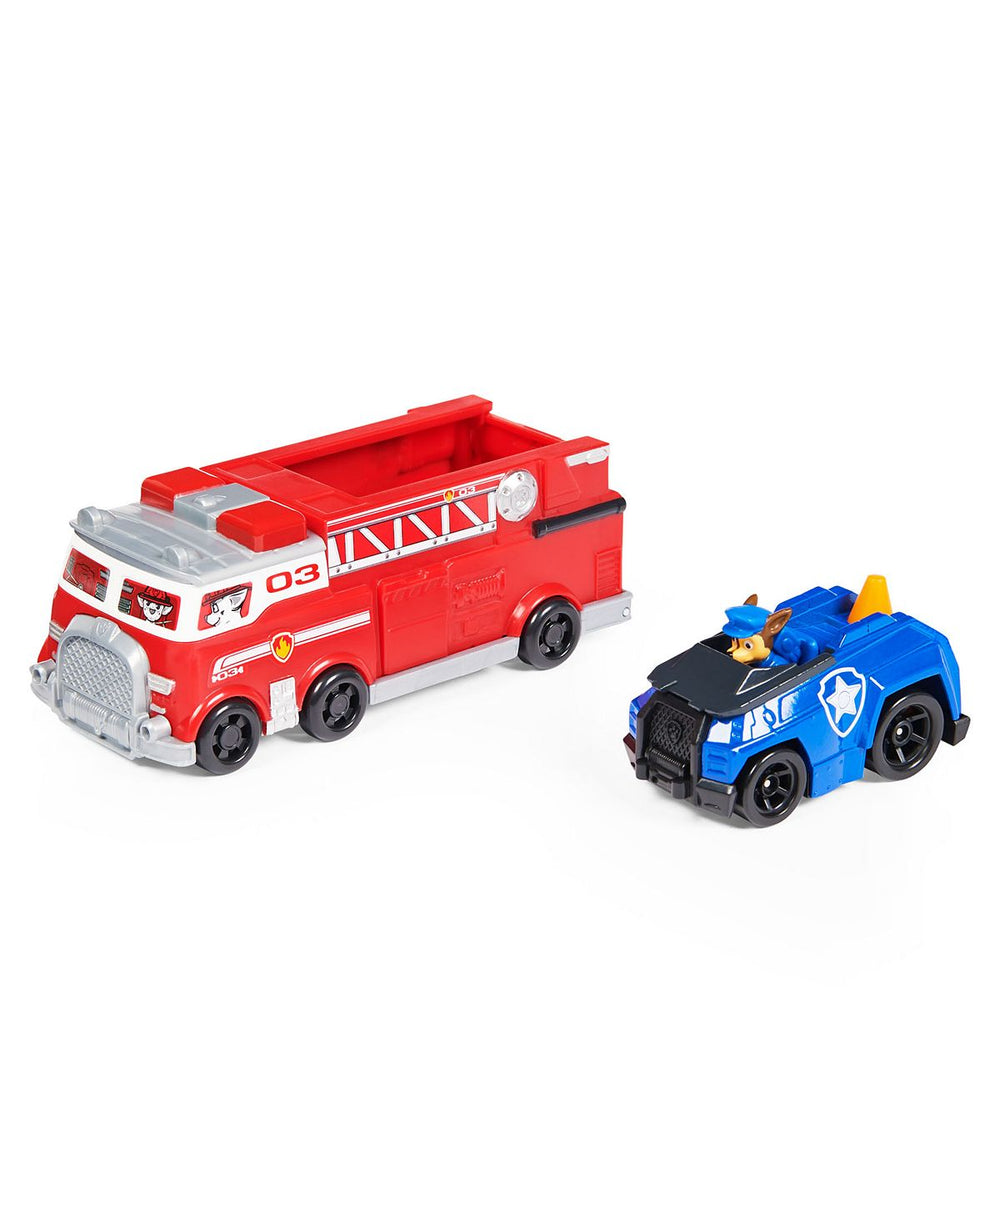 PAW Patrol True Metal Ultimate Firetruck with 1:55 Scale Chase Vehicle